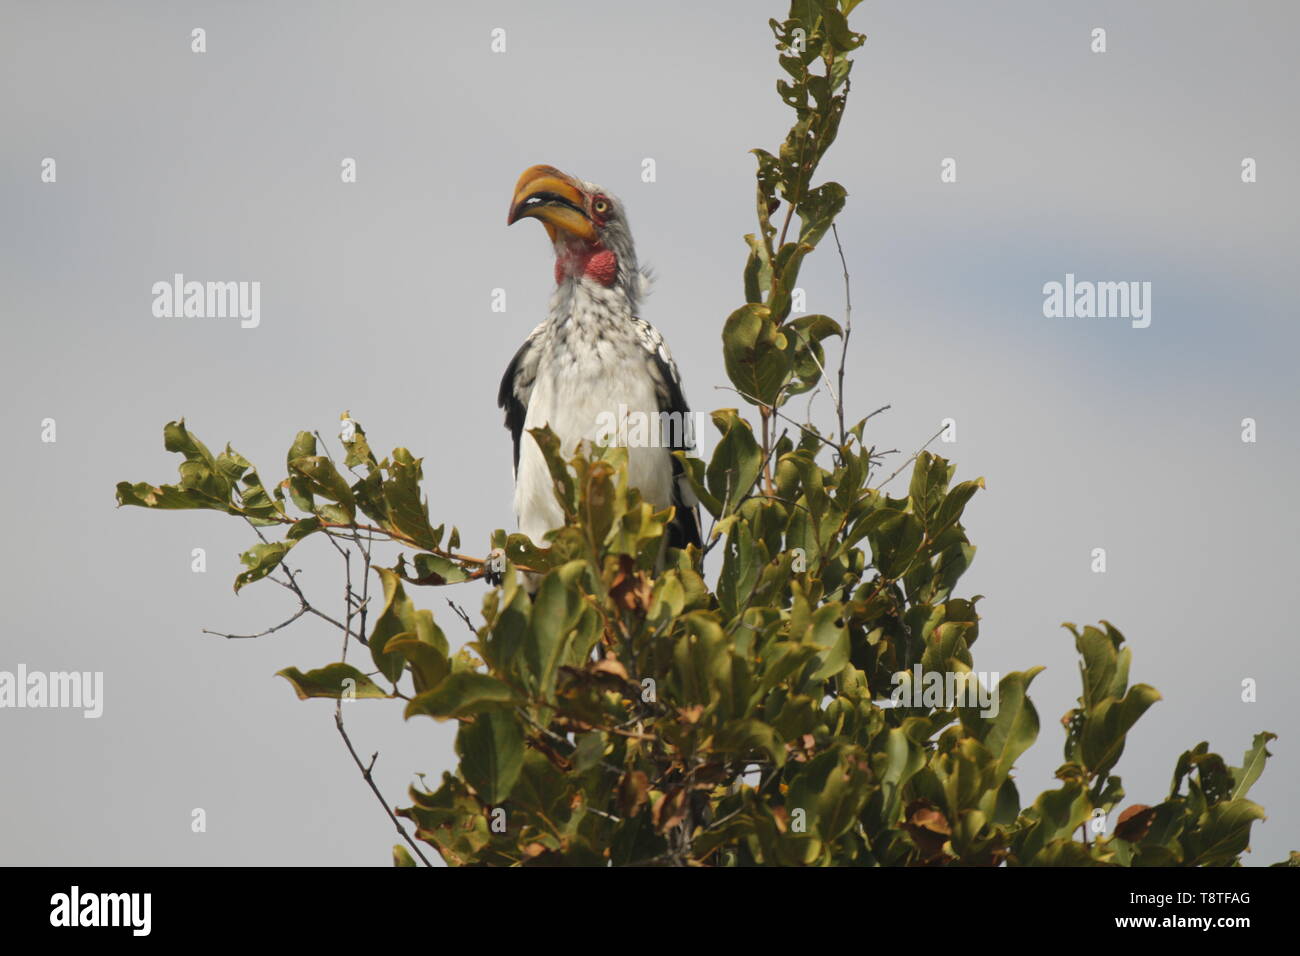 Adult yellow billed hornbill in a tree Stock Photo